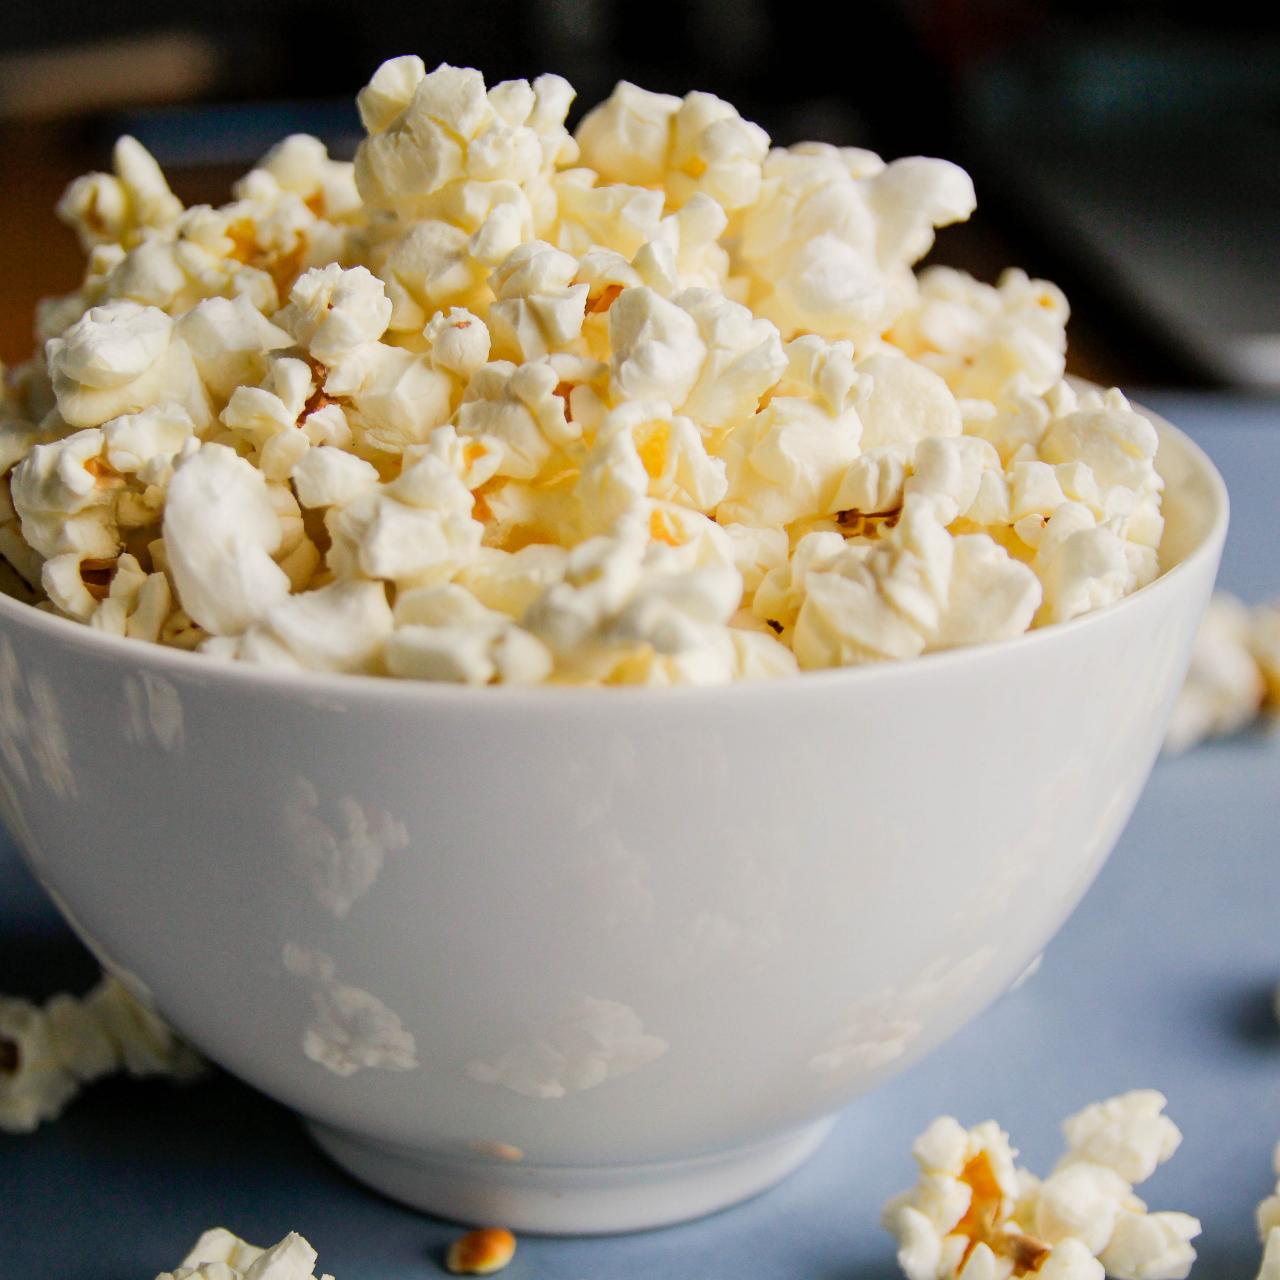 We Tried 8 Methods for Popping Popcorn at Home And Found The Very Best